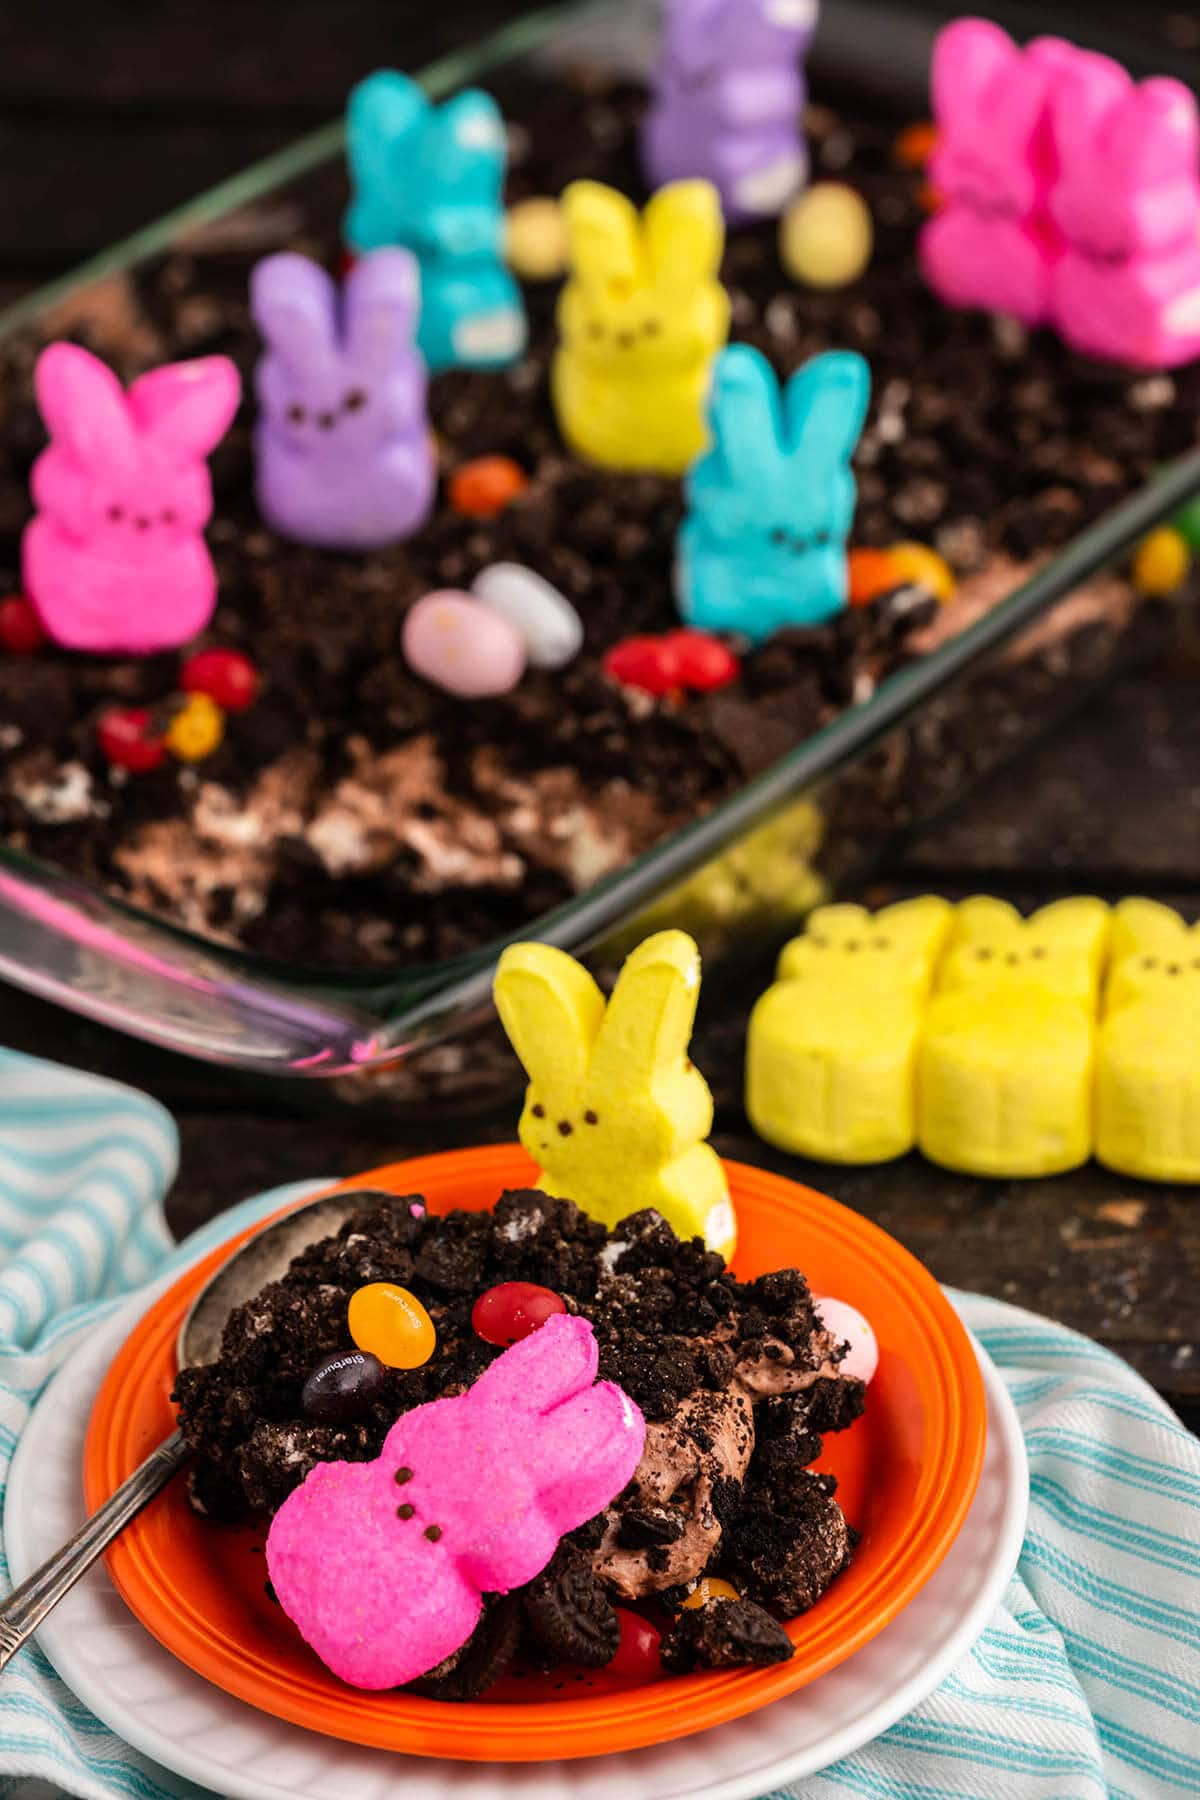 Chocolate cake decorated with peeps and candy Easter eggs, with serving on plate. 